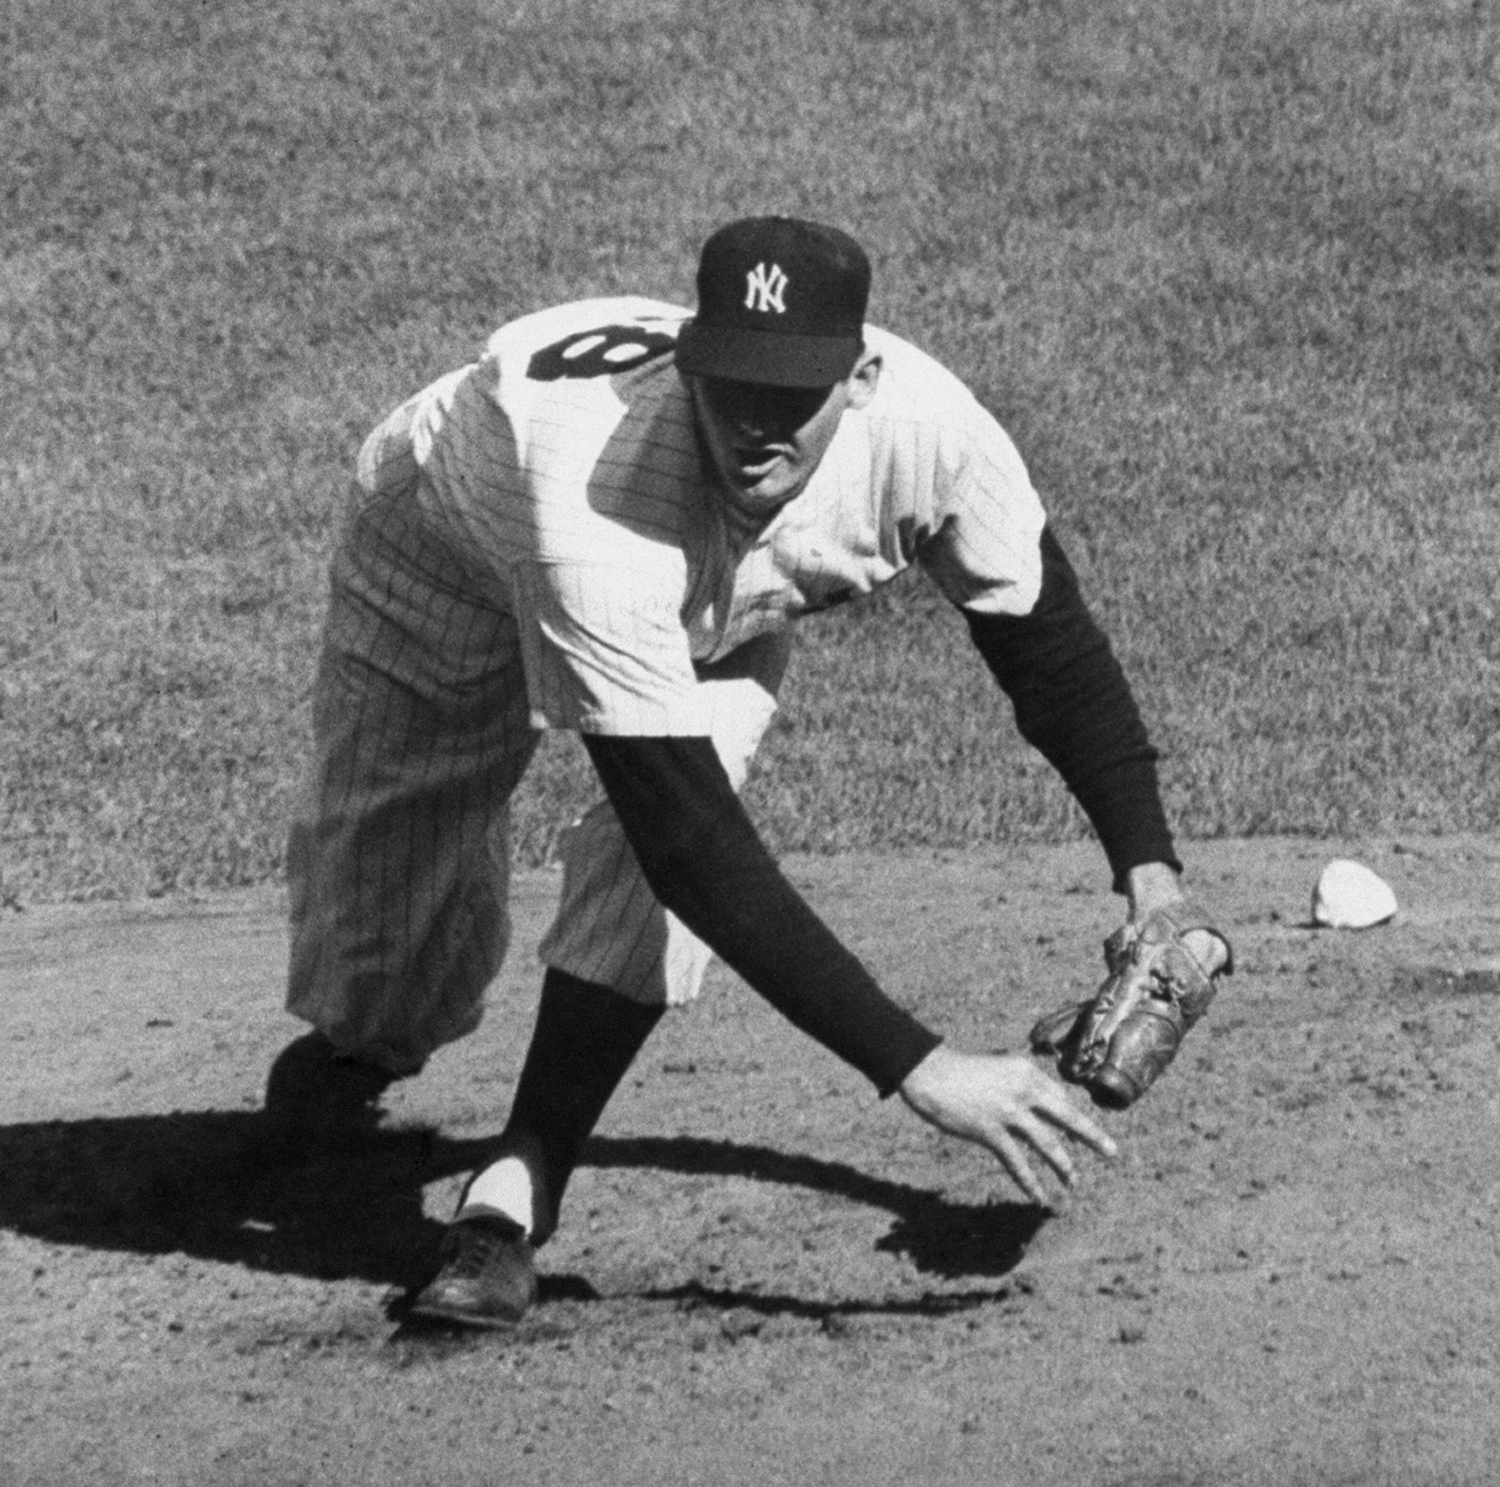 Don Larsen pitching at Yankee Stadium during his World Series perfect game against the Dodgers, Oct. 8, 1956.